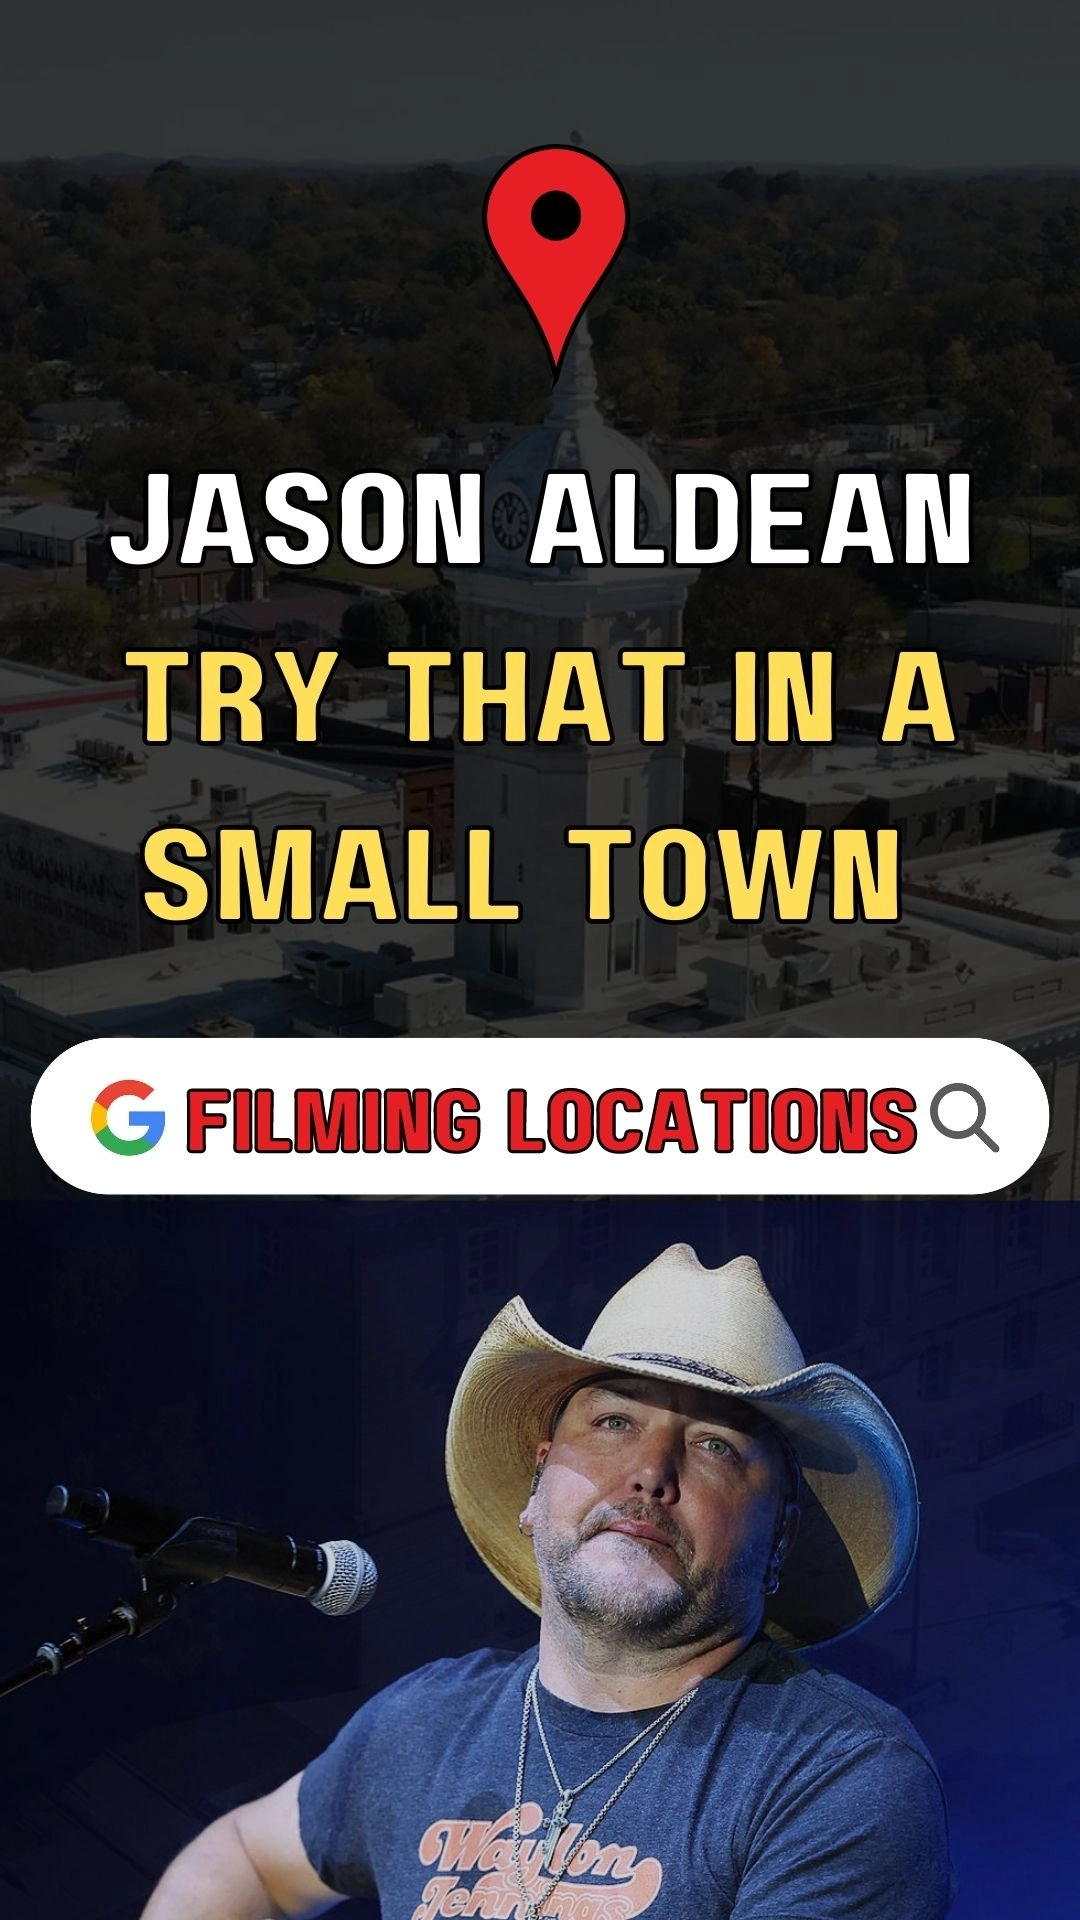 Jason Aldean Try That In A Small Town Filming Locations